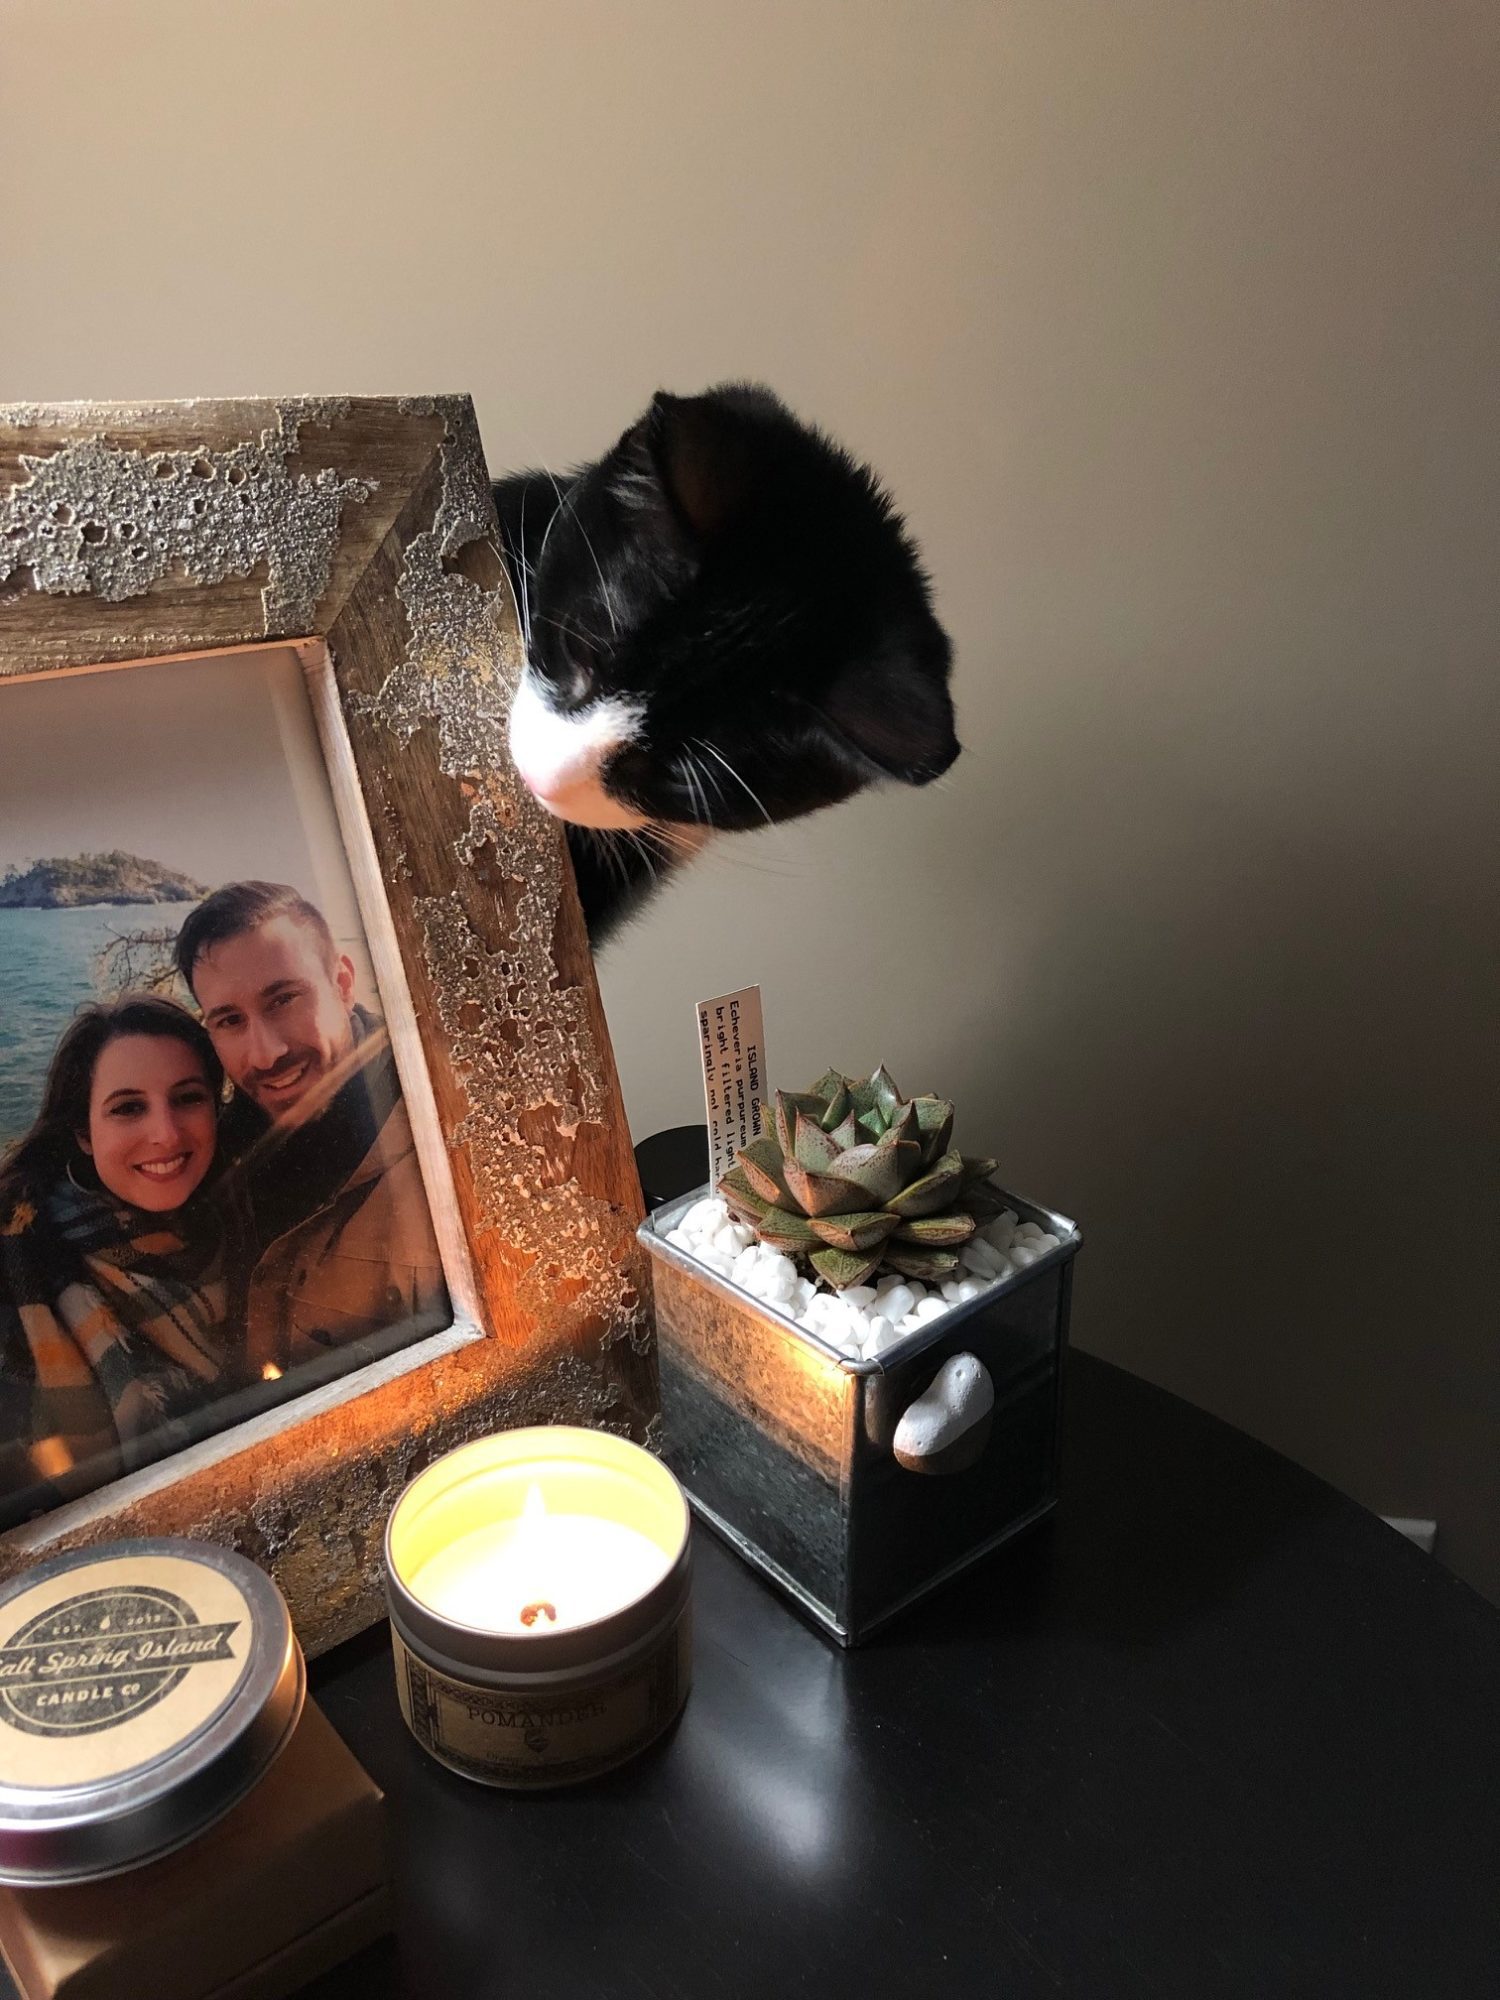 Howard the tuxedo kitten takes a look at a photo of his guardians.